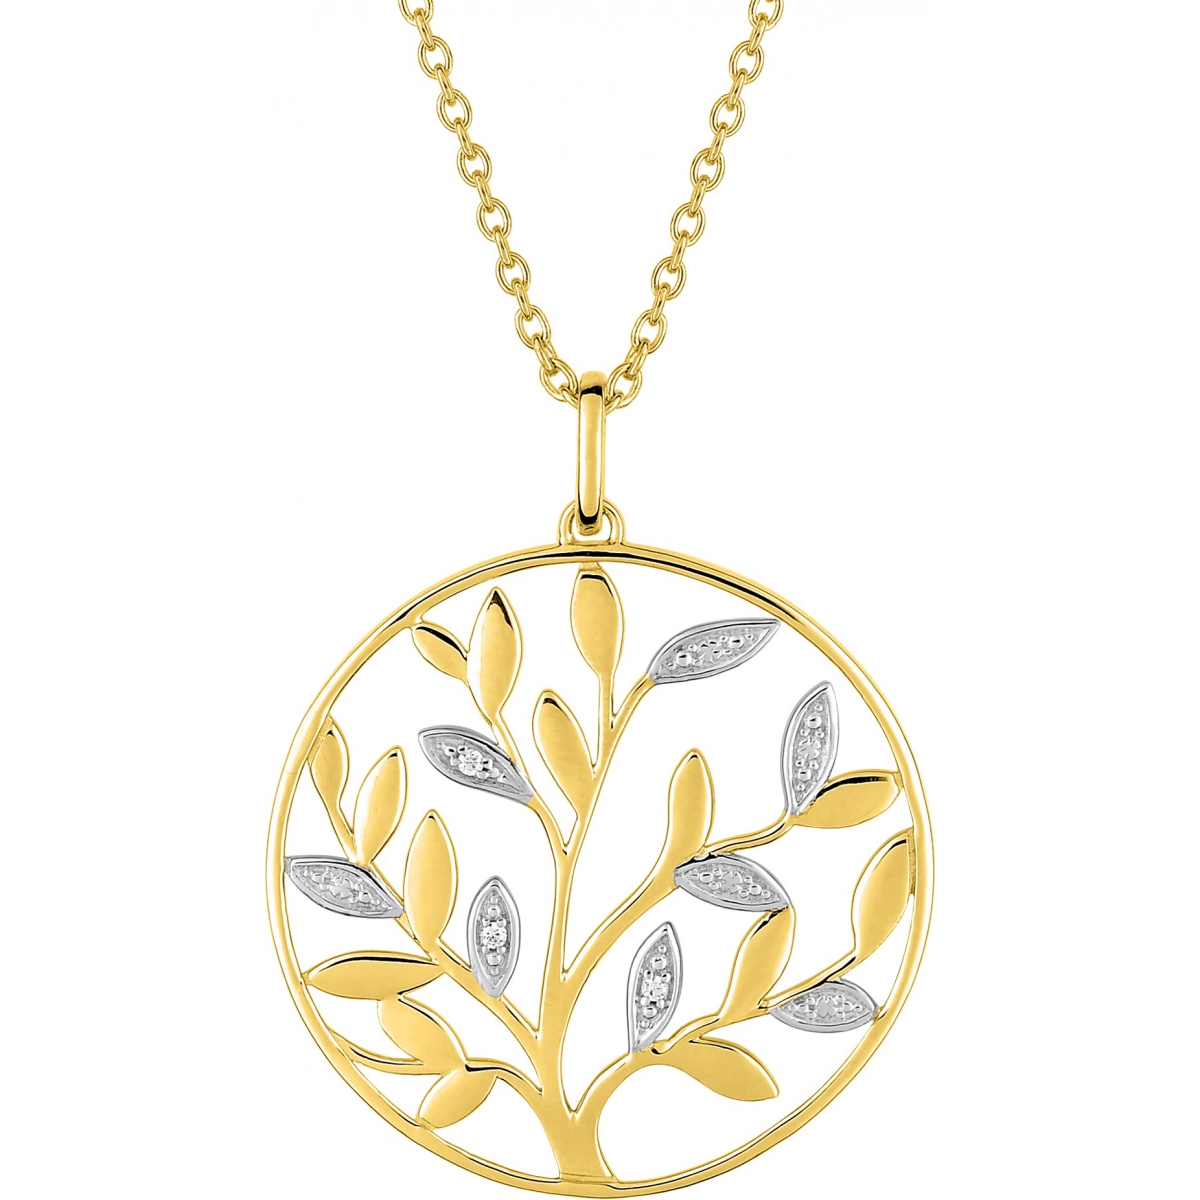 Necklace w. cz and rhod gold plated Brass  Lua Blanca  132199.1.0